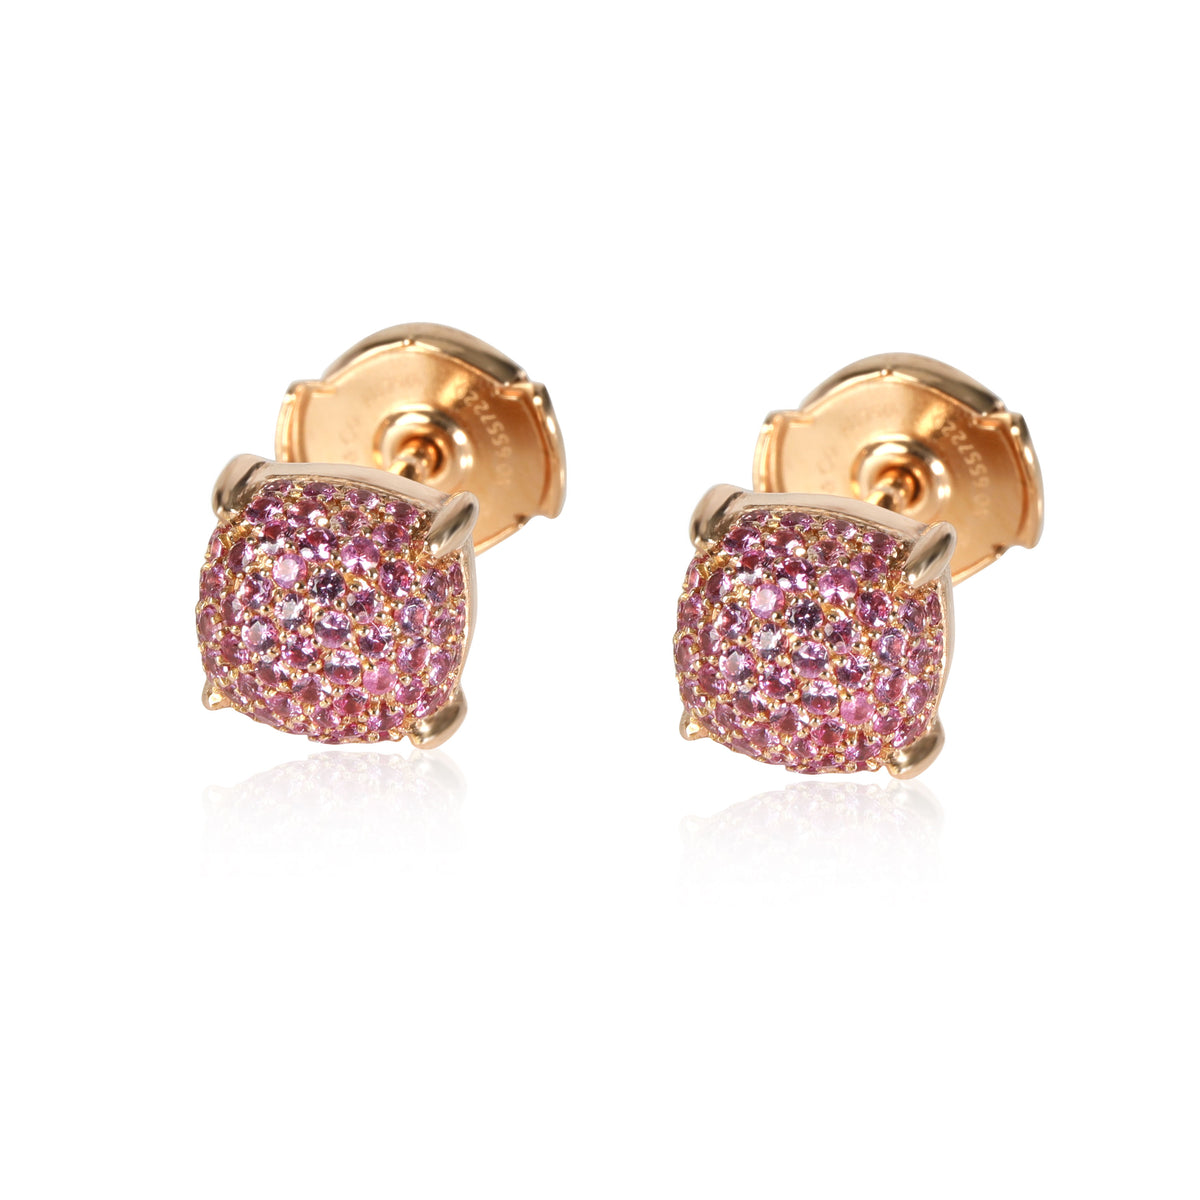 Tiffany & Co. Paloma's Sugar Stacks Sapphire Stud Earring in 18K Rose Gold